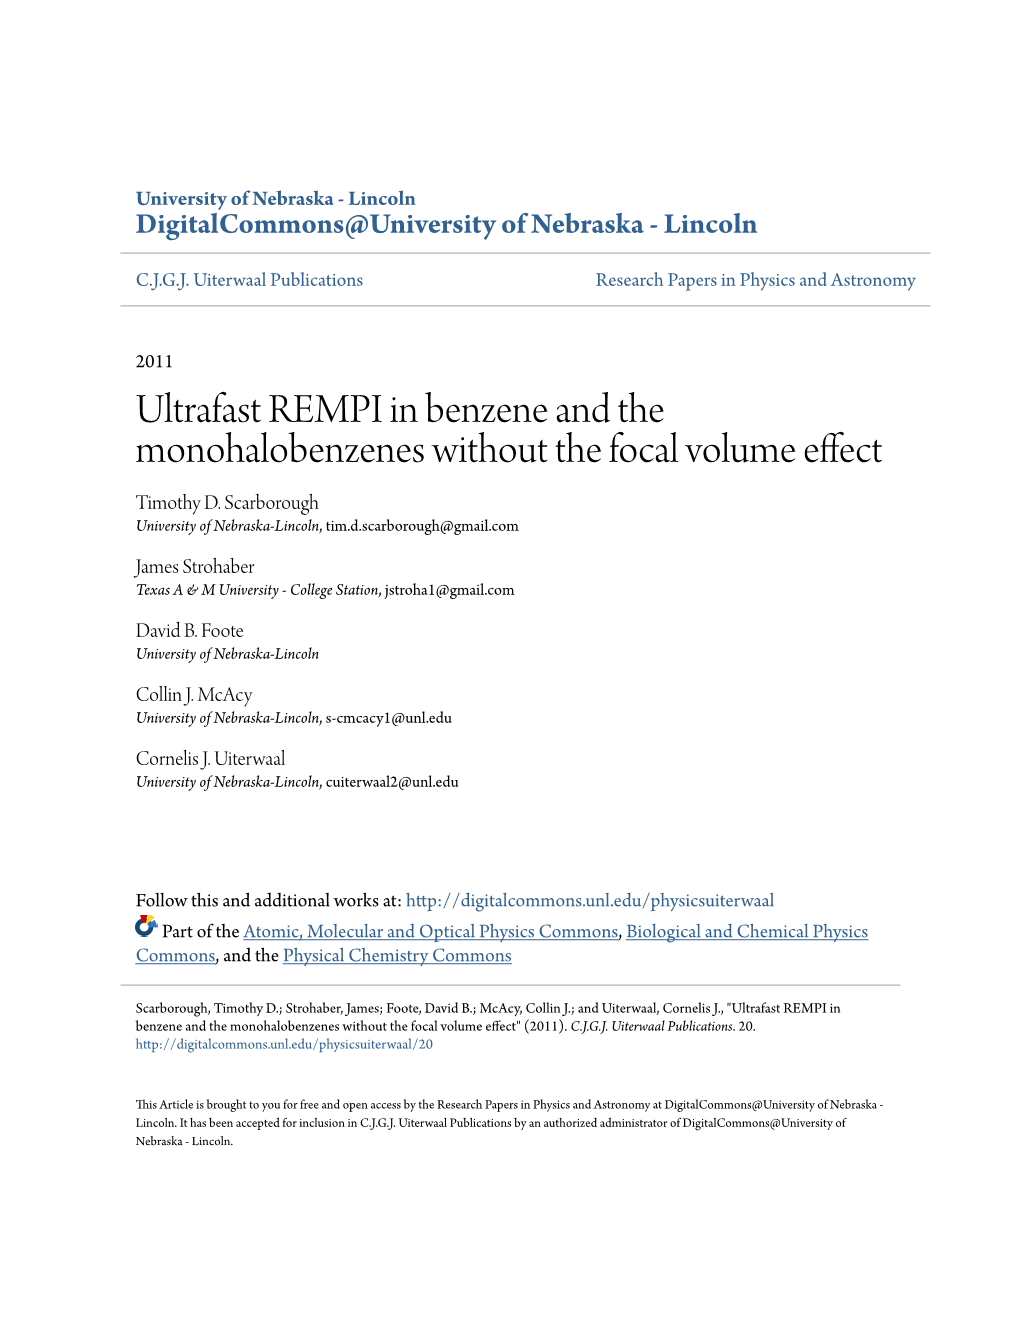 Ultrafast REMPI in Benzene and the Monohalobenzenes Without the Focal Volume Effect Timothy D